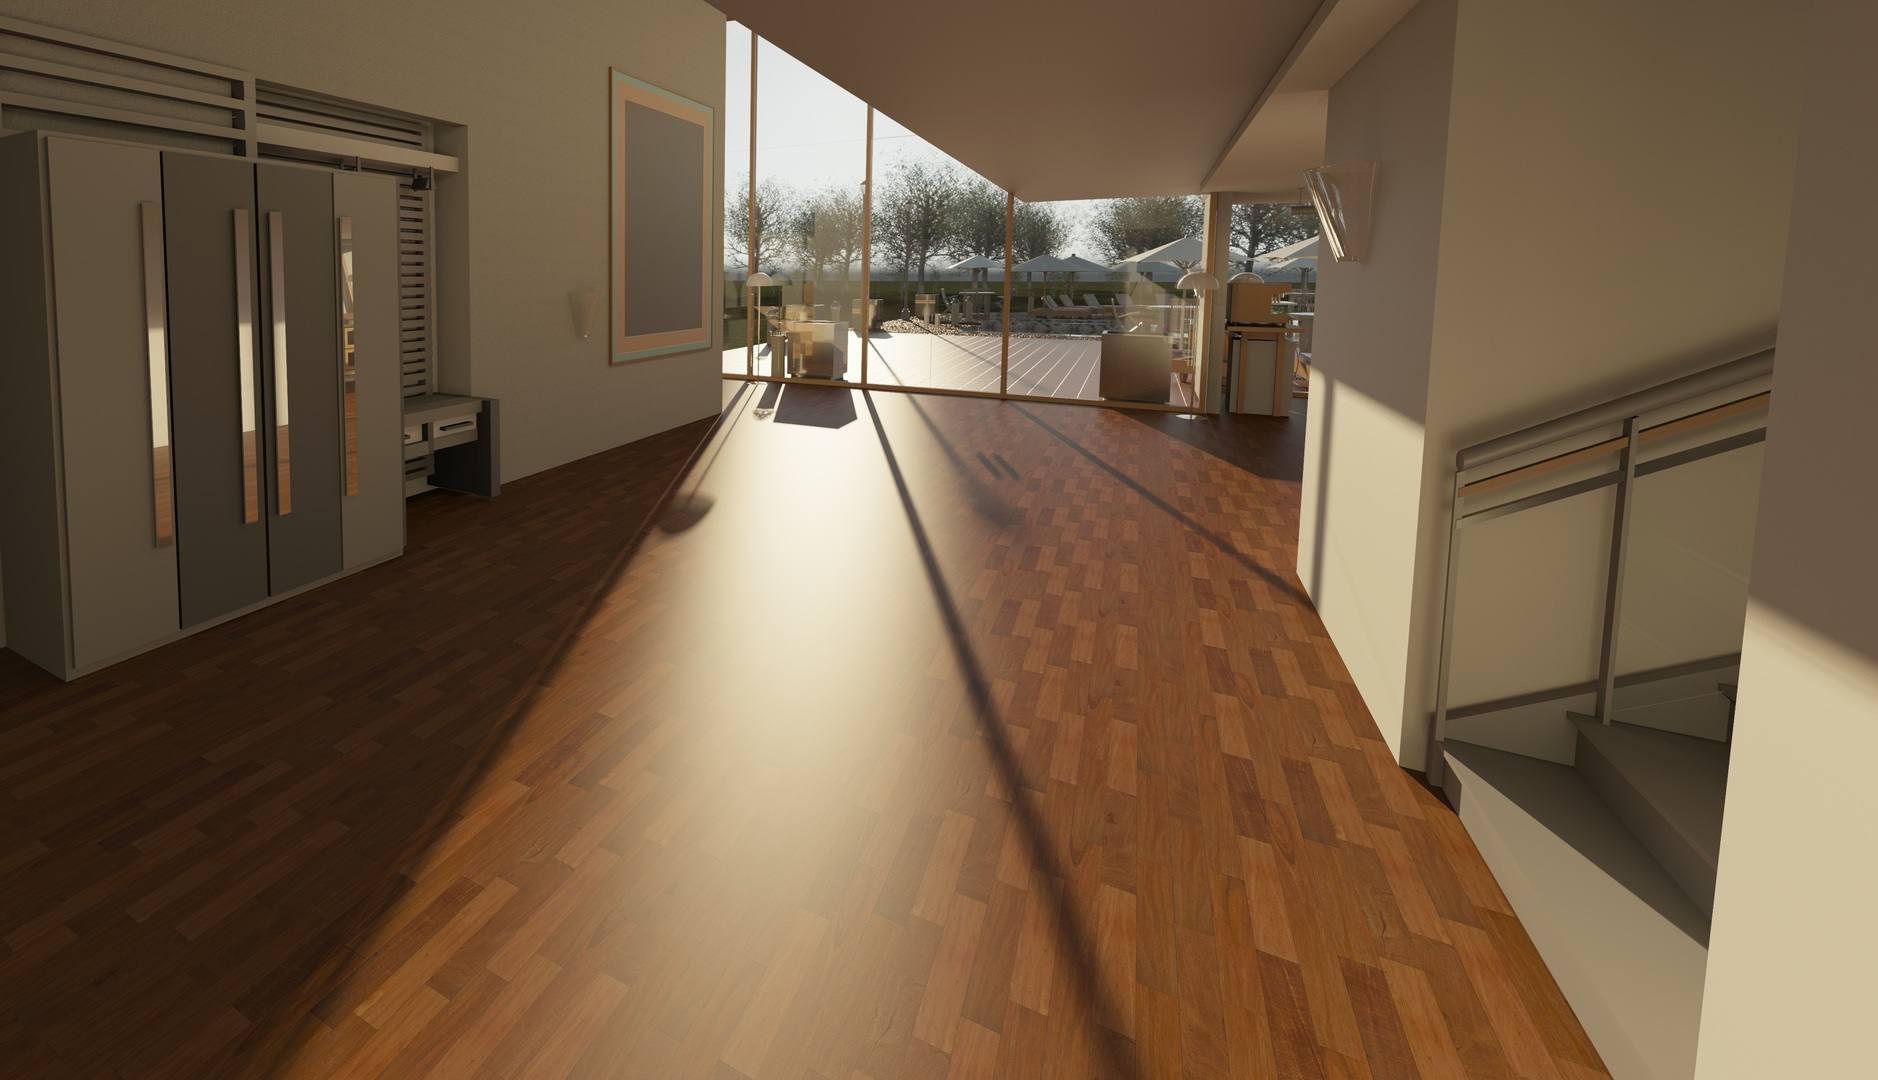 13 Nice Hardwood Floors In Bedroom or Carpet 2024 free download hardwood floors in bedroom or carpet of common flooring types currently used in renovation and building regarding architecture wood house floor interior window 917178 pxhere com 5ba27a2cc9e7